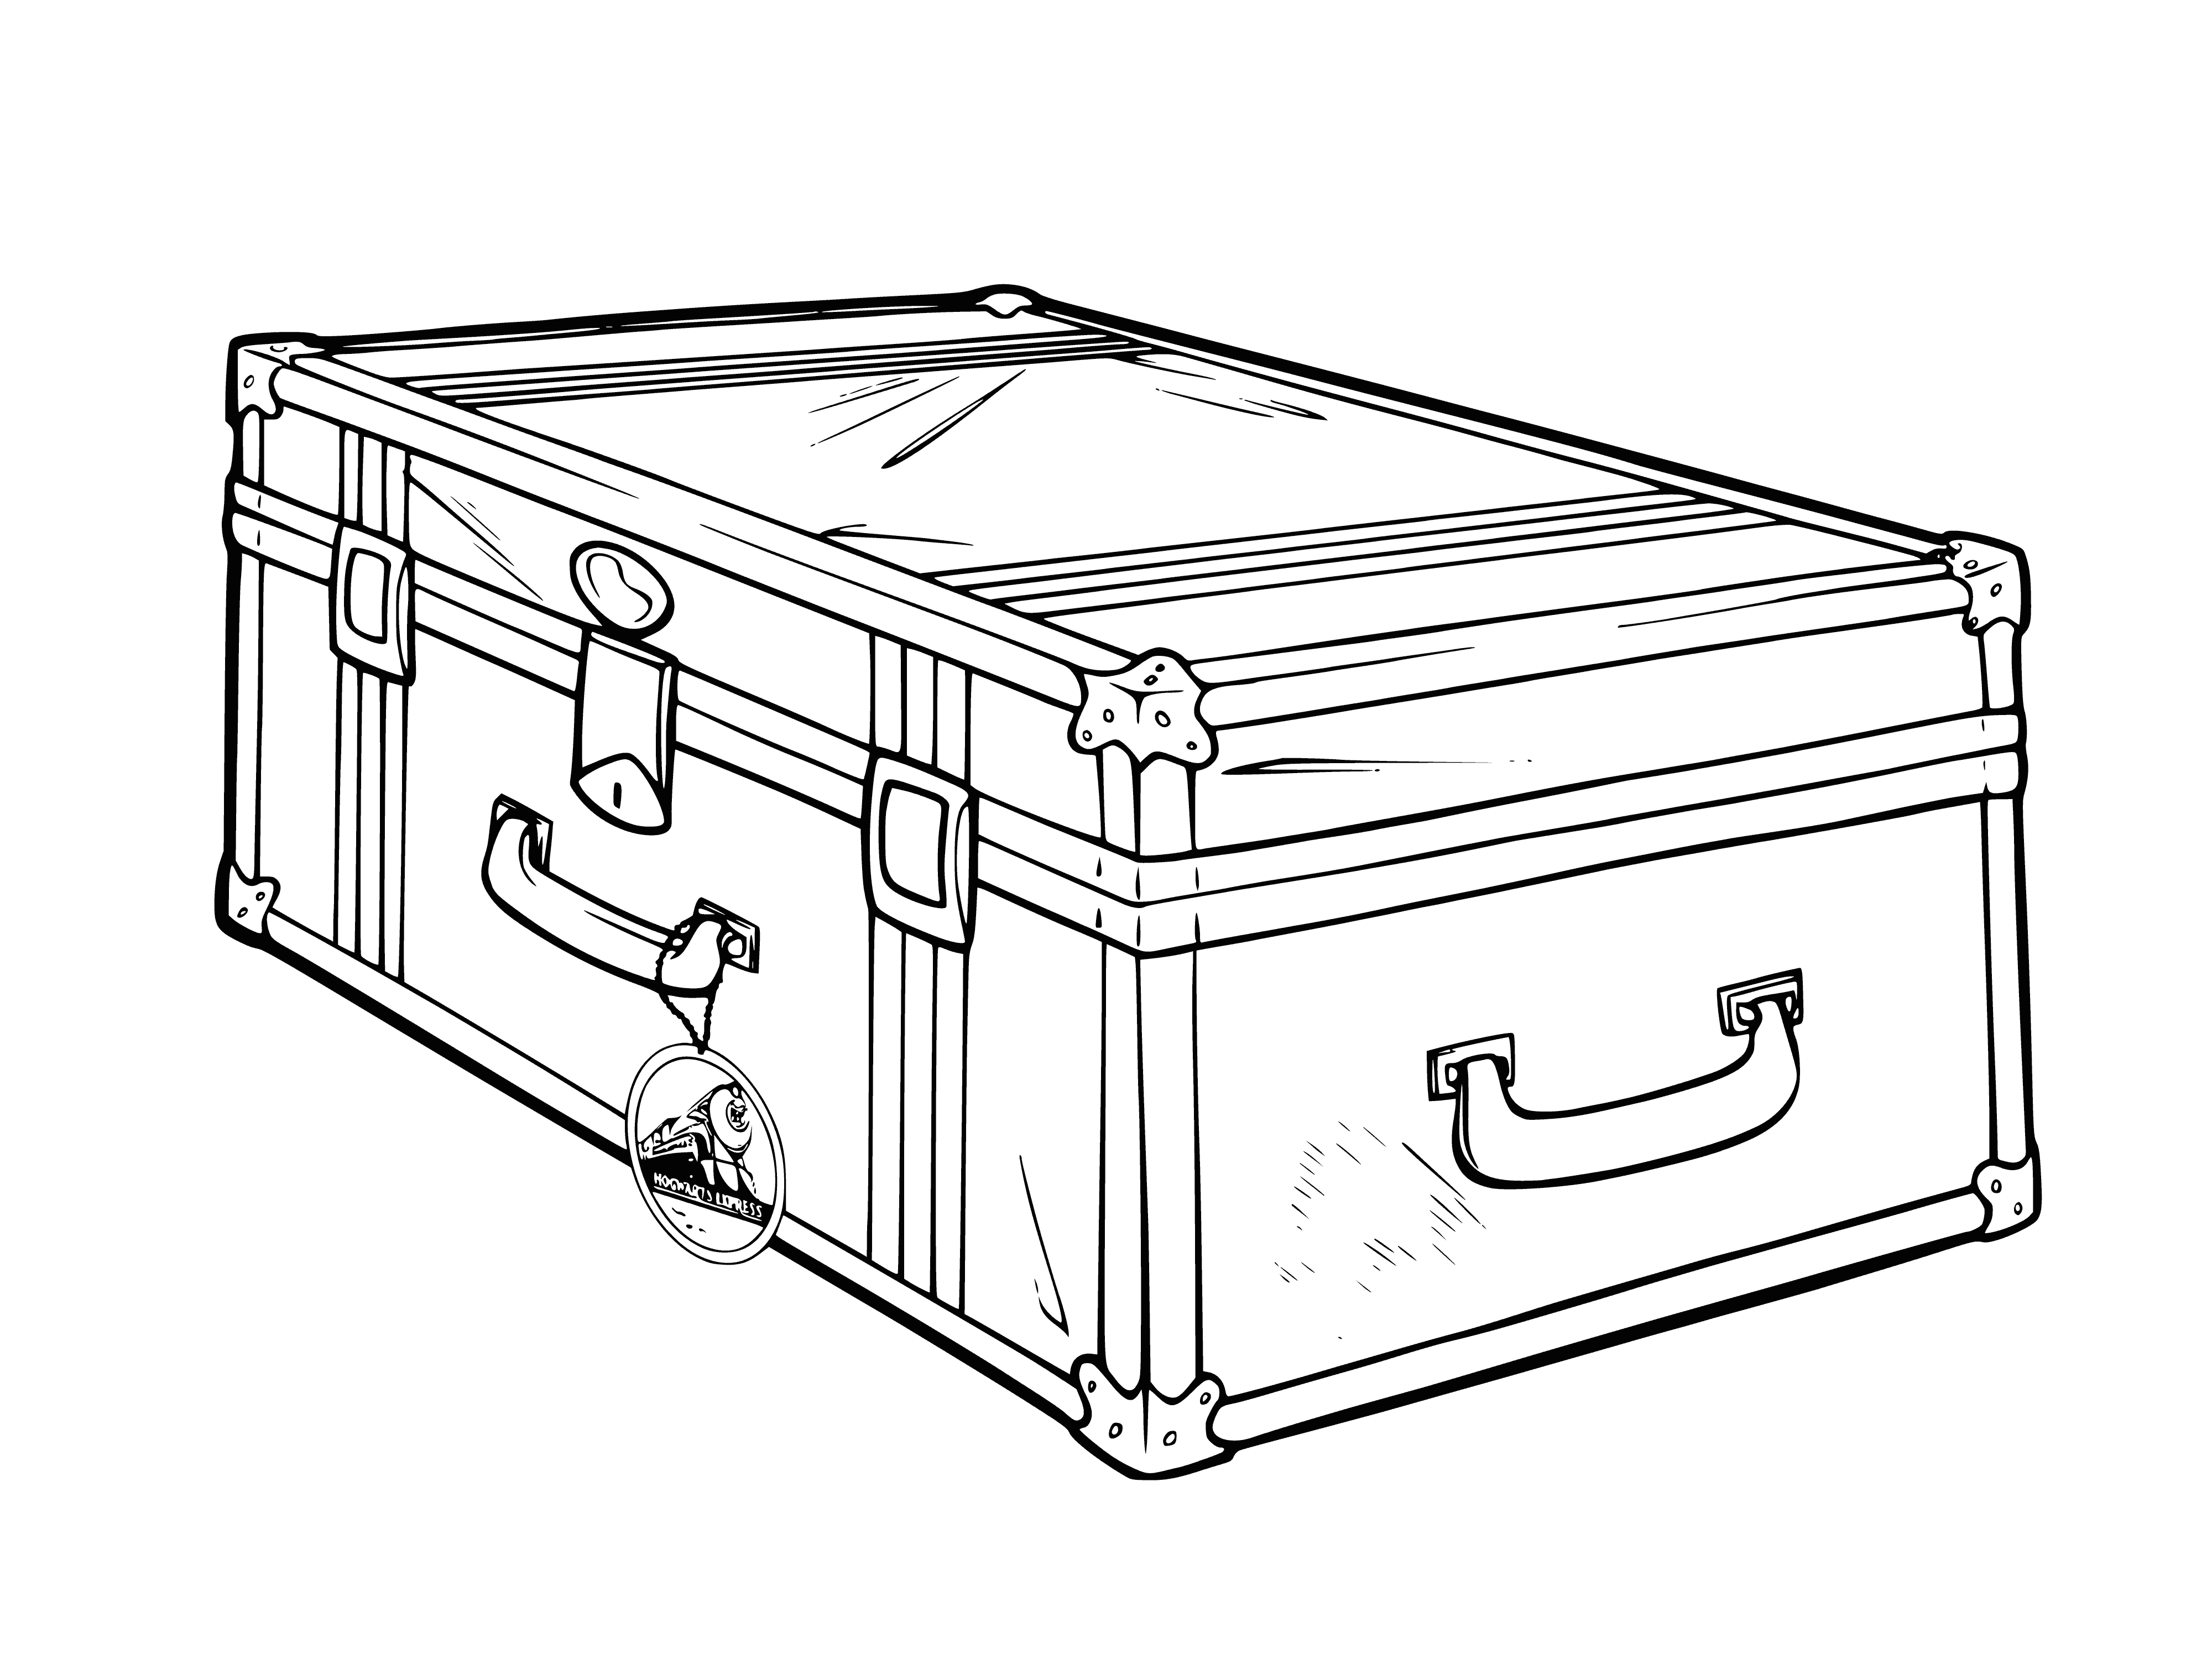 Hogwarts Express Suitcase coloring page